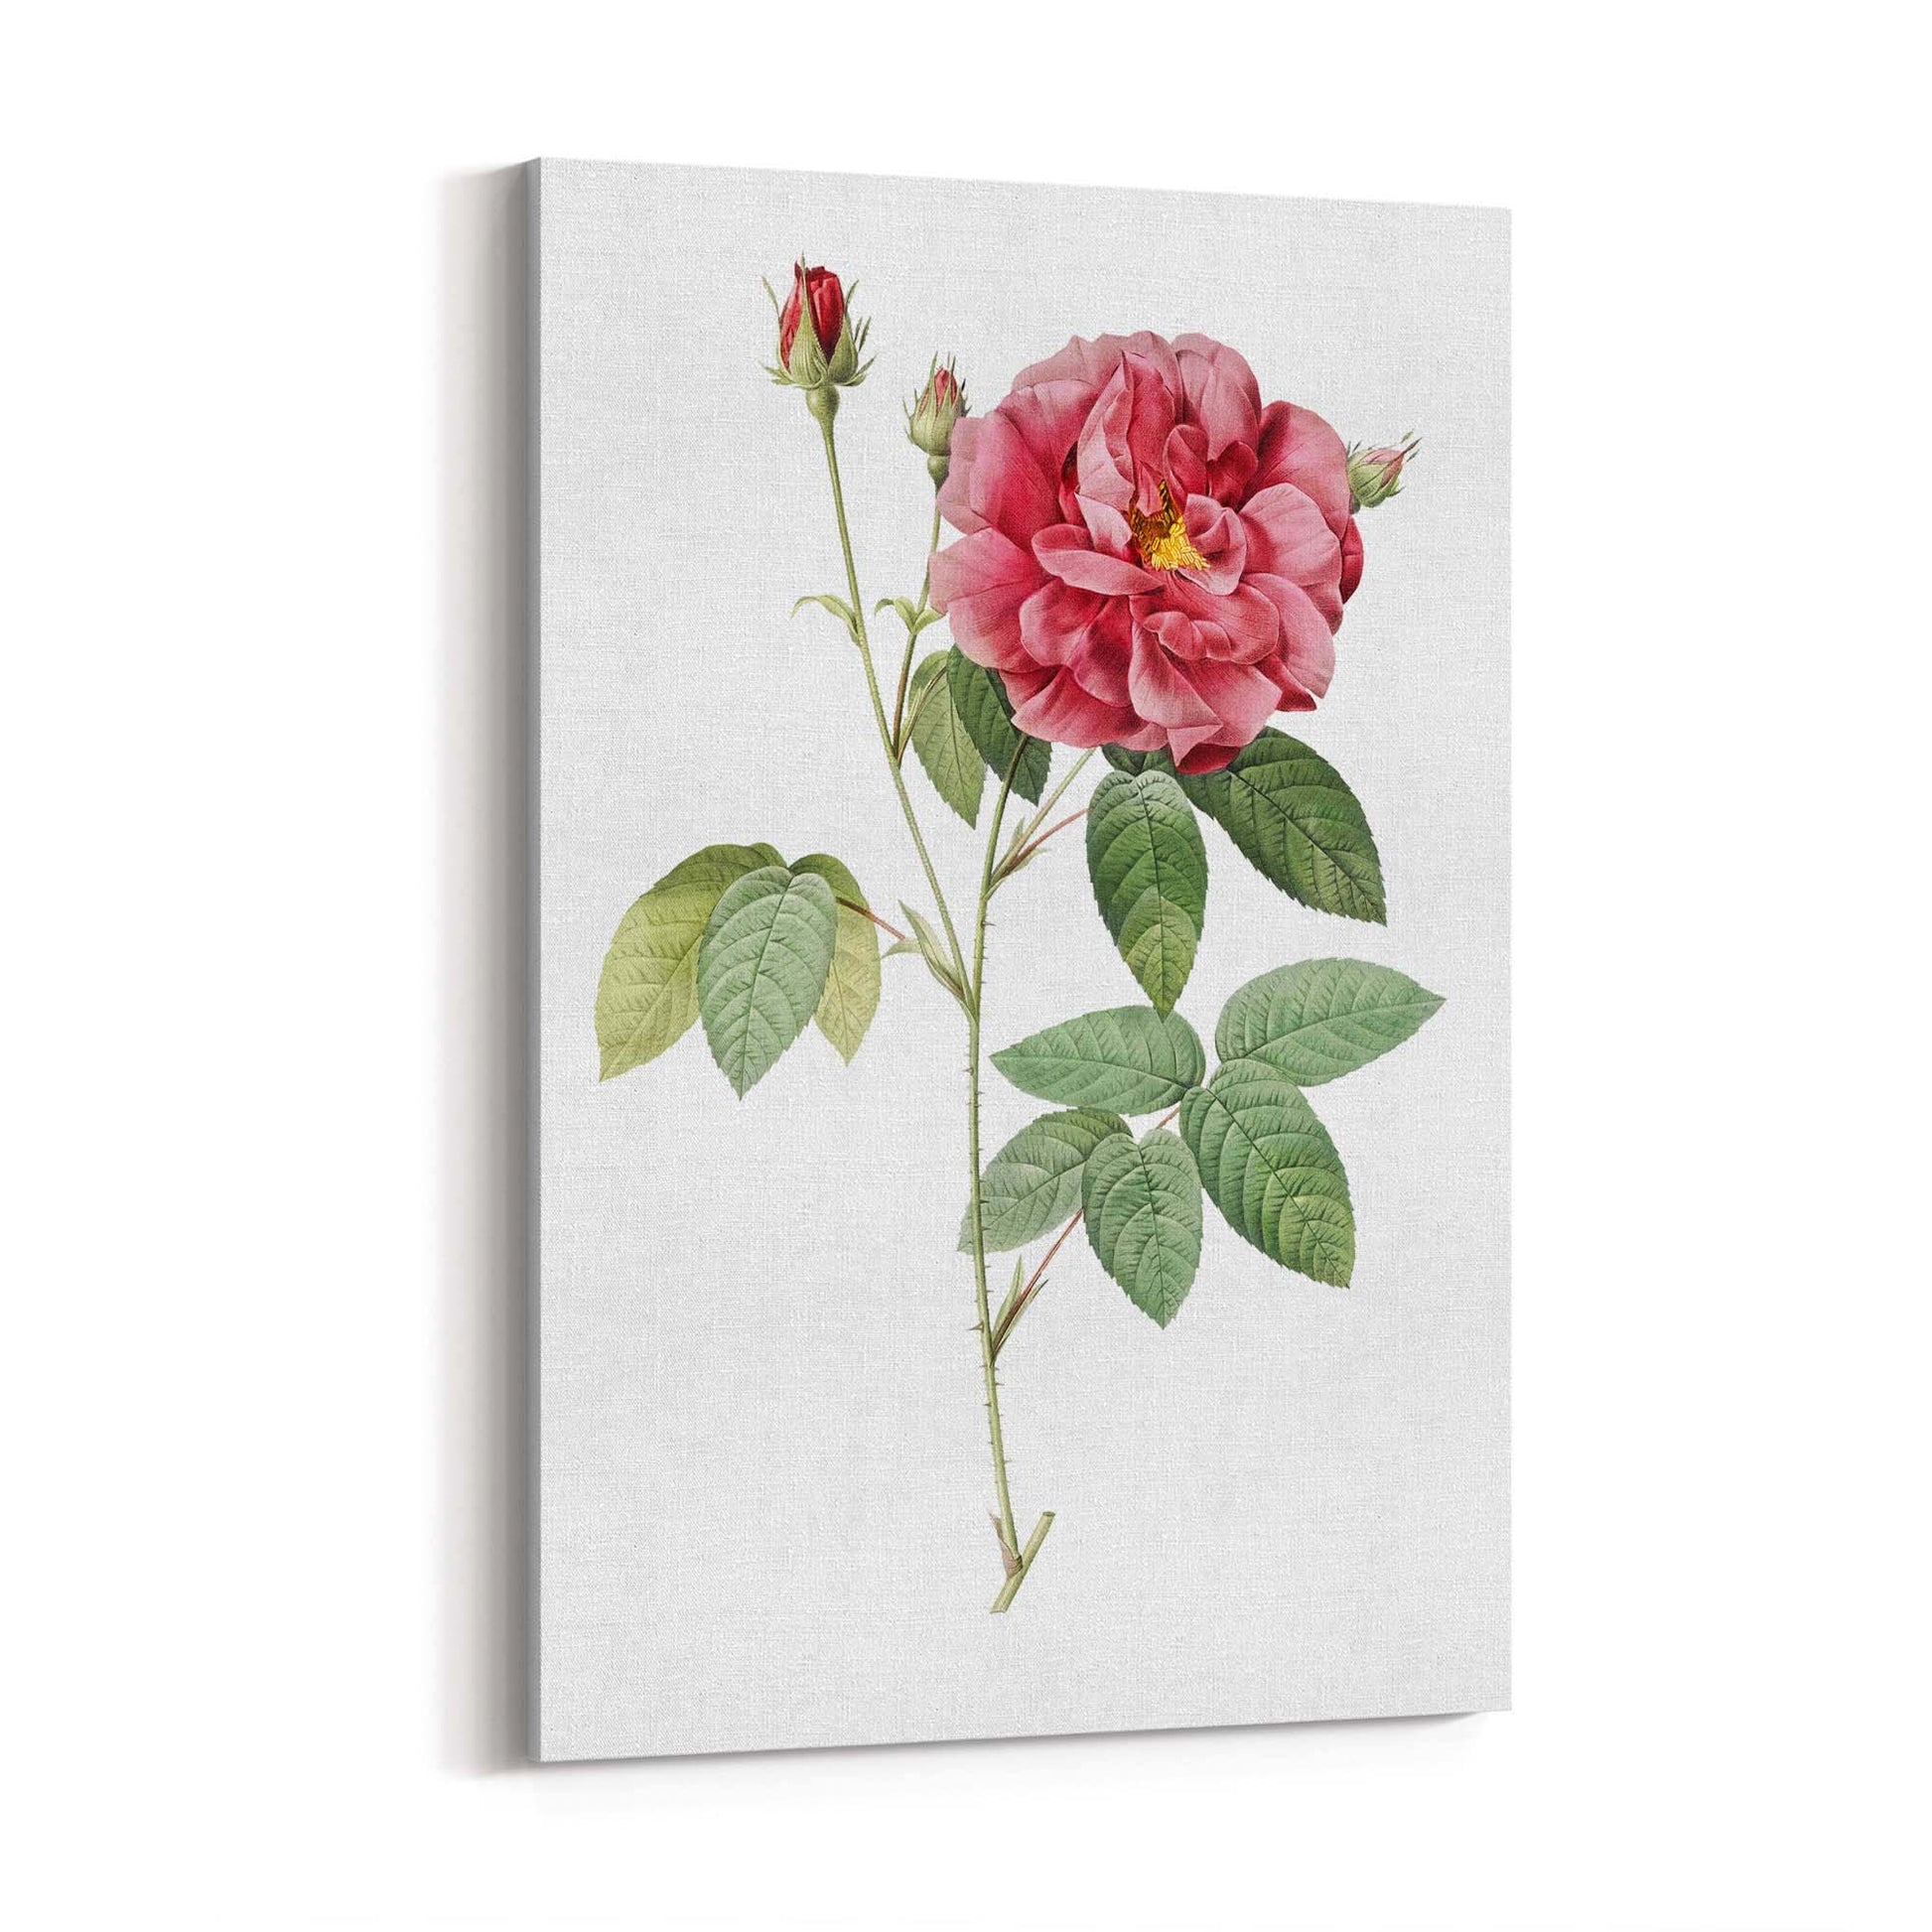 Flower Botanical Painting Kitchen Hallway Wall Art #17 - The Affordable Art Company